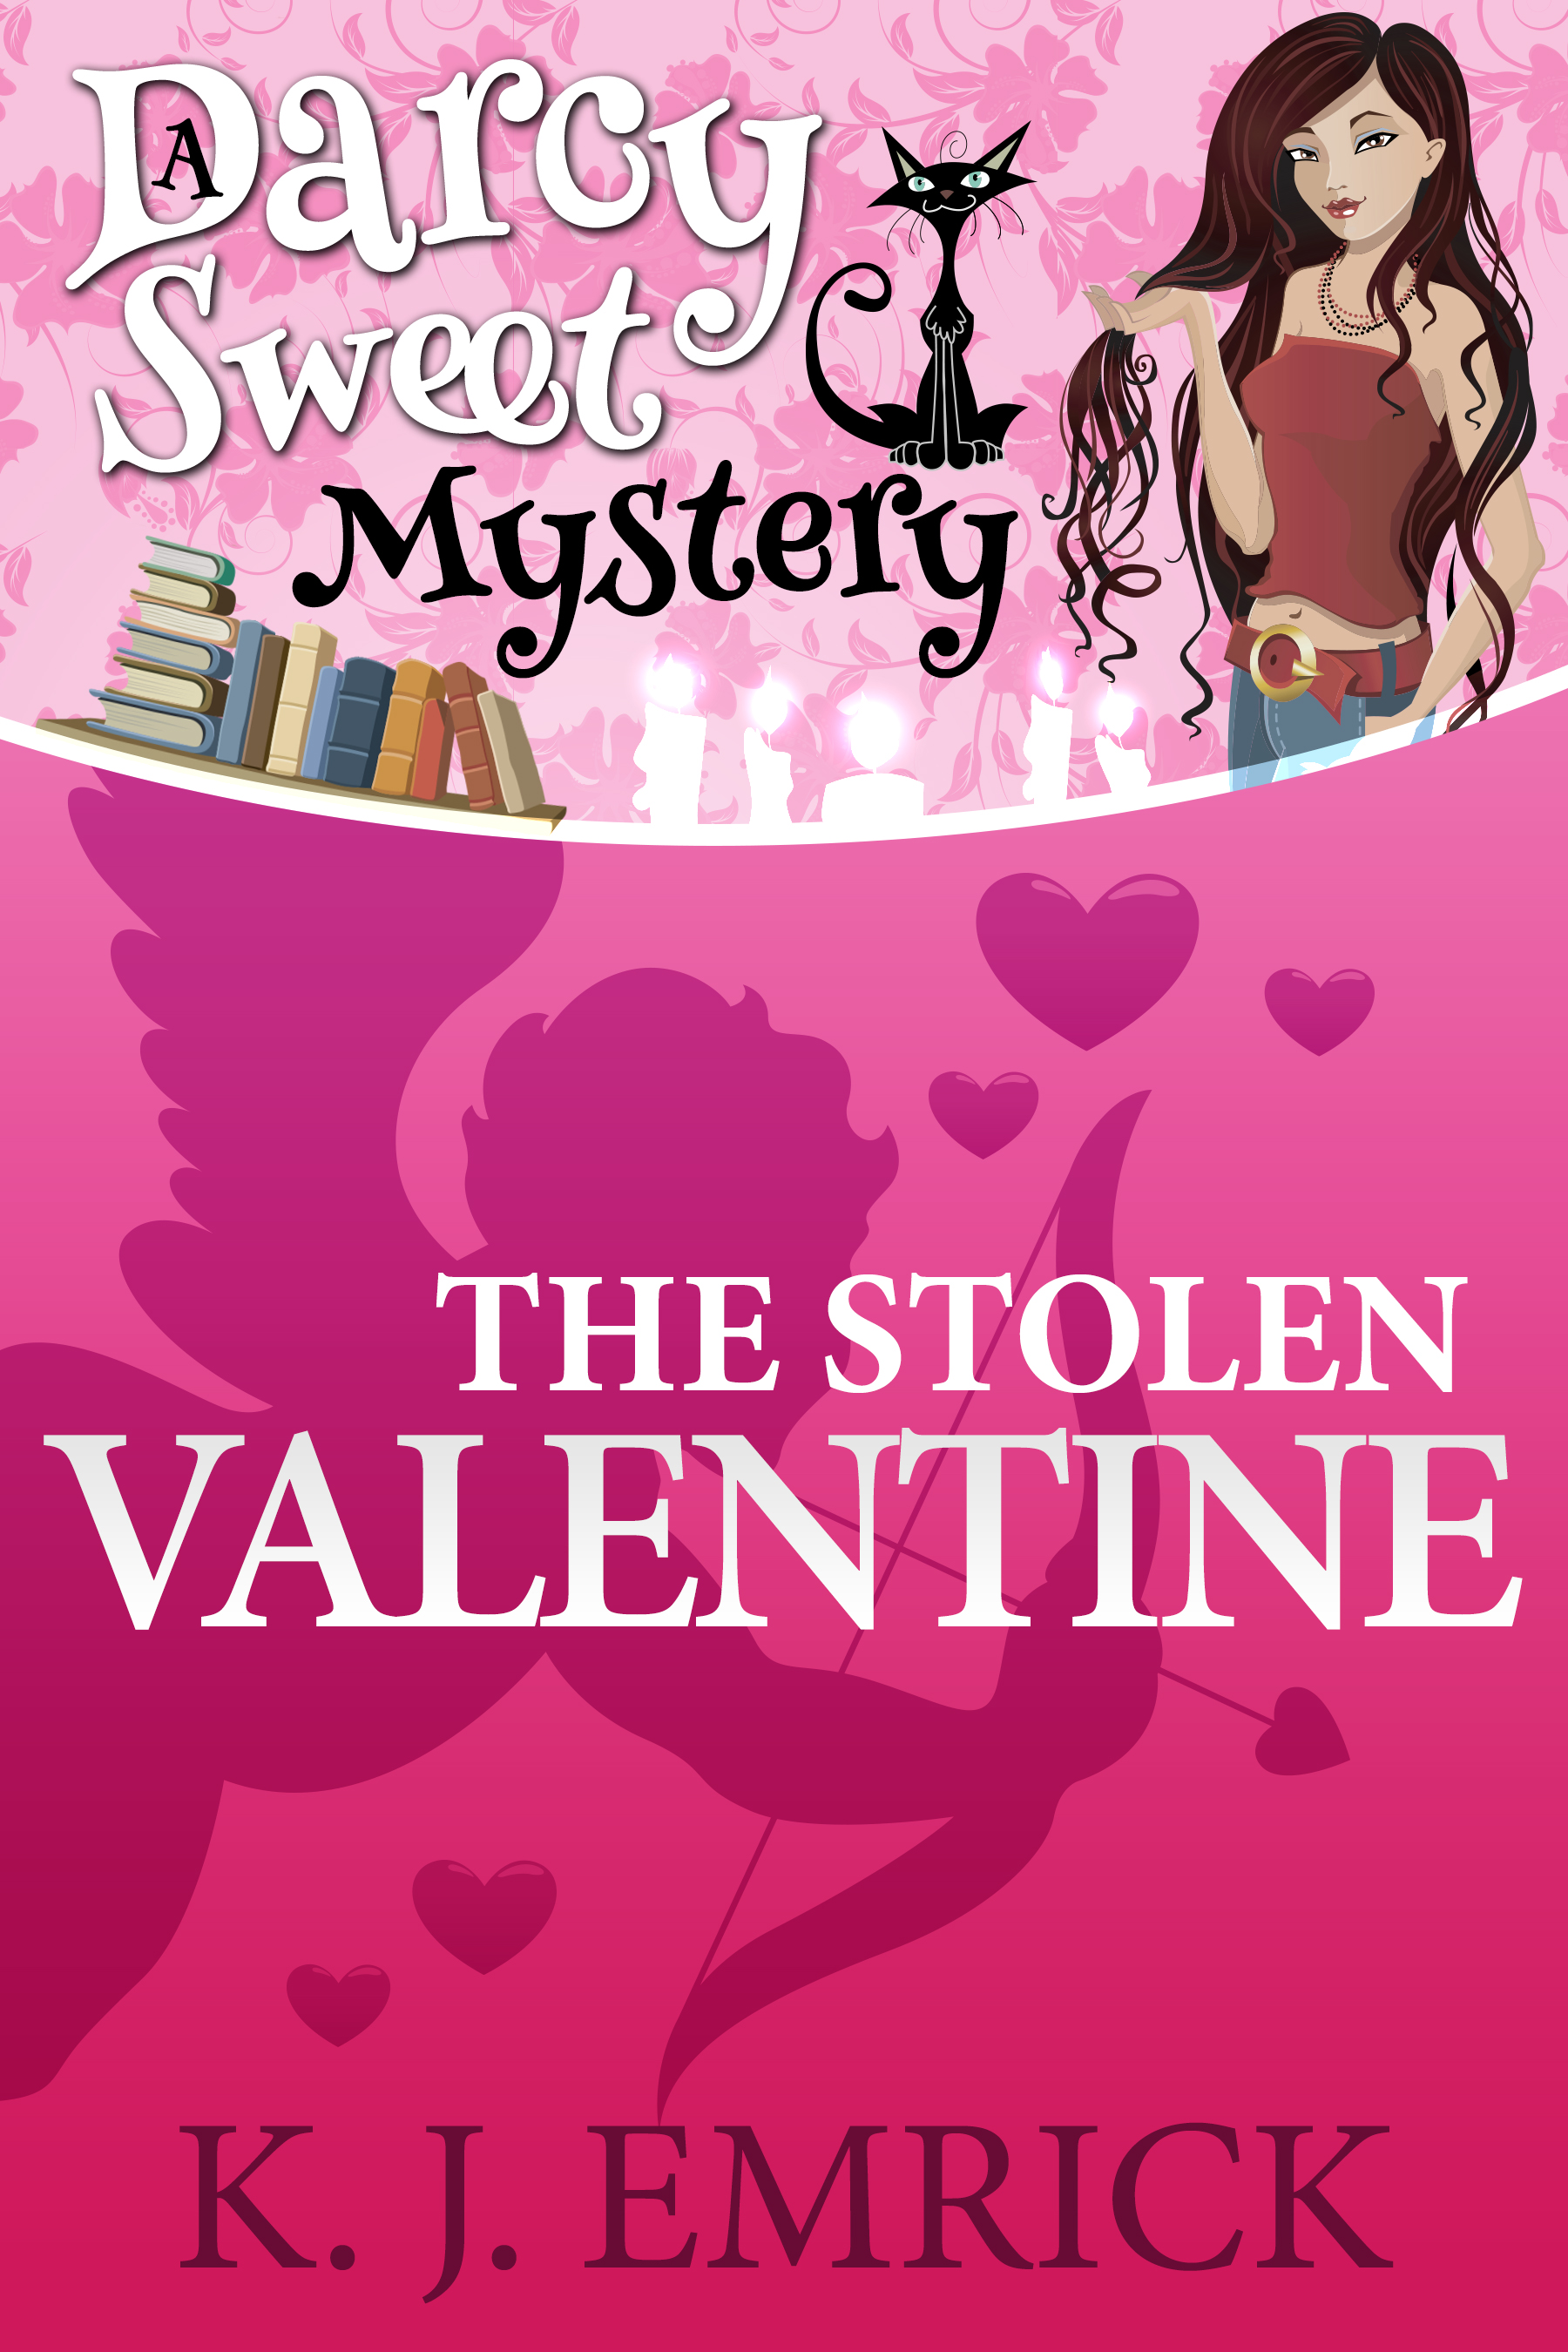 The Lost Valentine - A Darcy Sweet Mystery